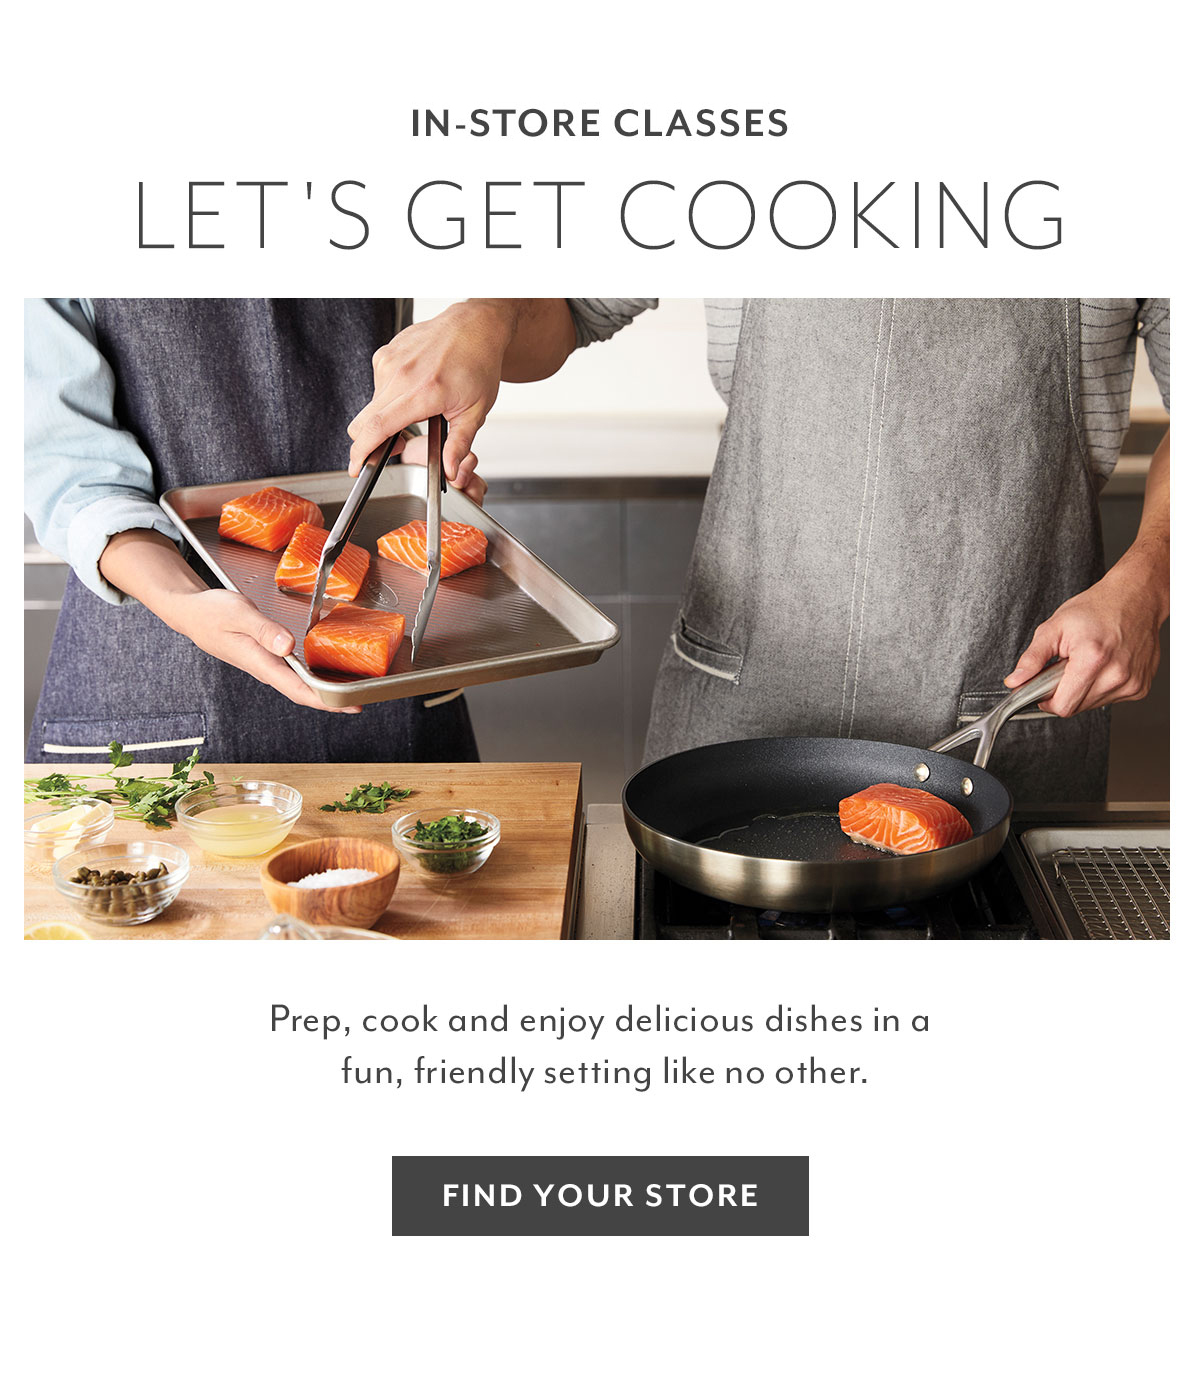 IN-STORE CLASSES LET'S GET COOKING Prep, cook and enjoy delicious dishes in a fun, friendly setting like no other. FIND YOUR STORE 